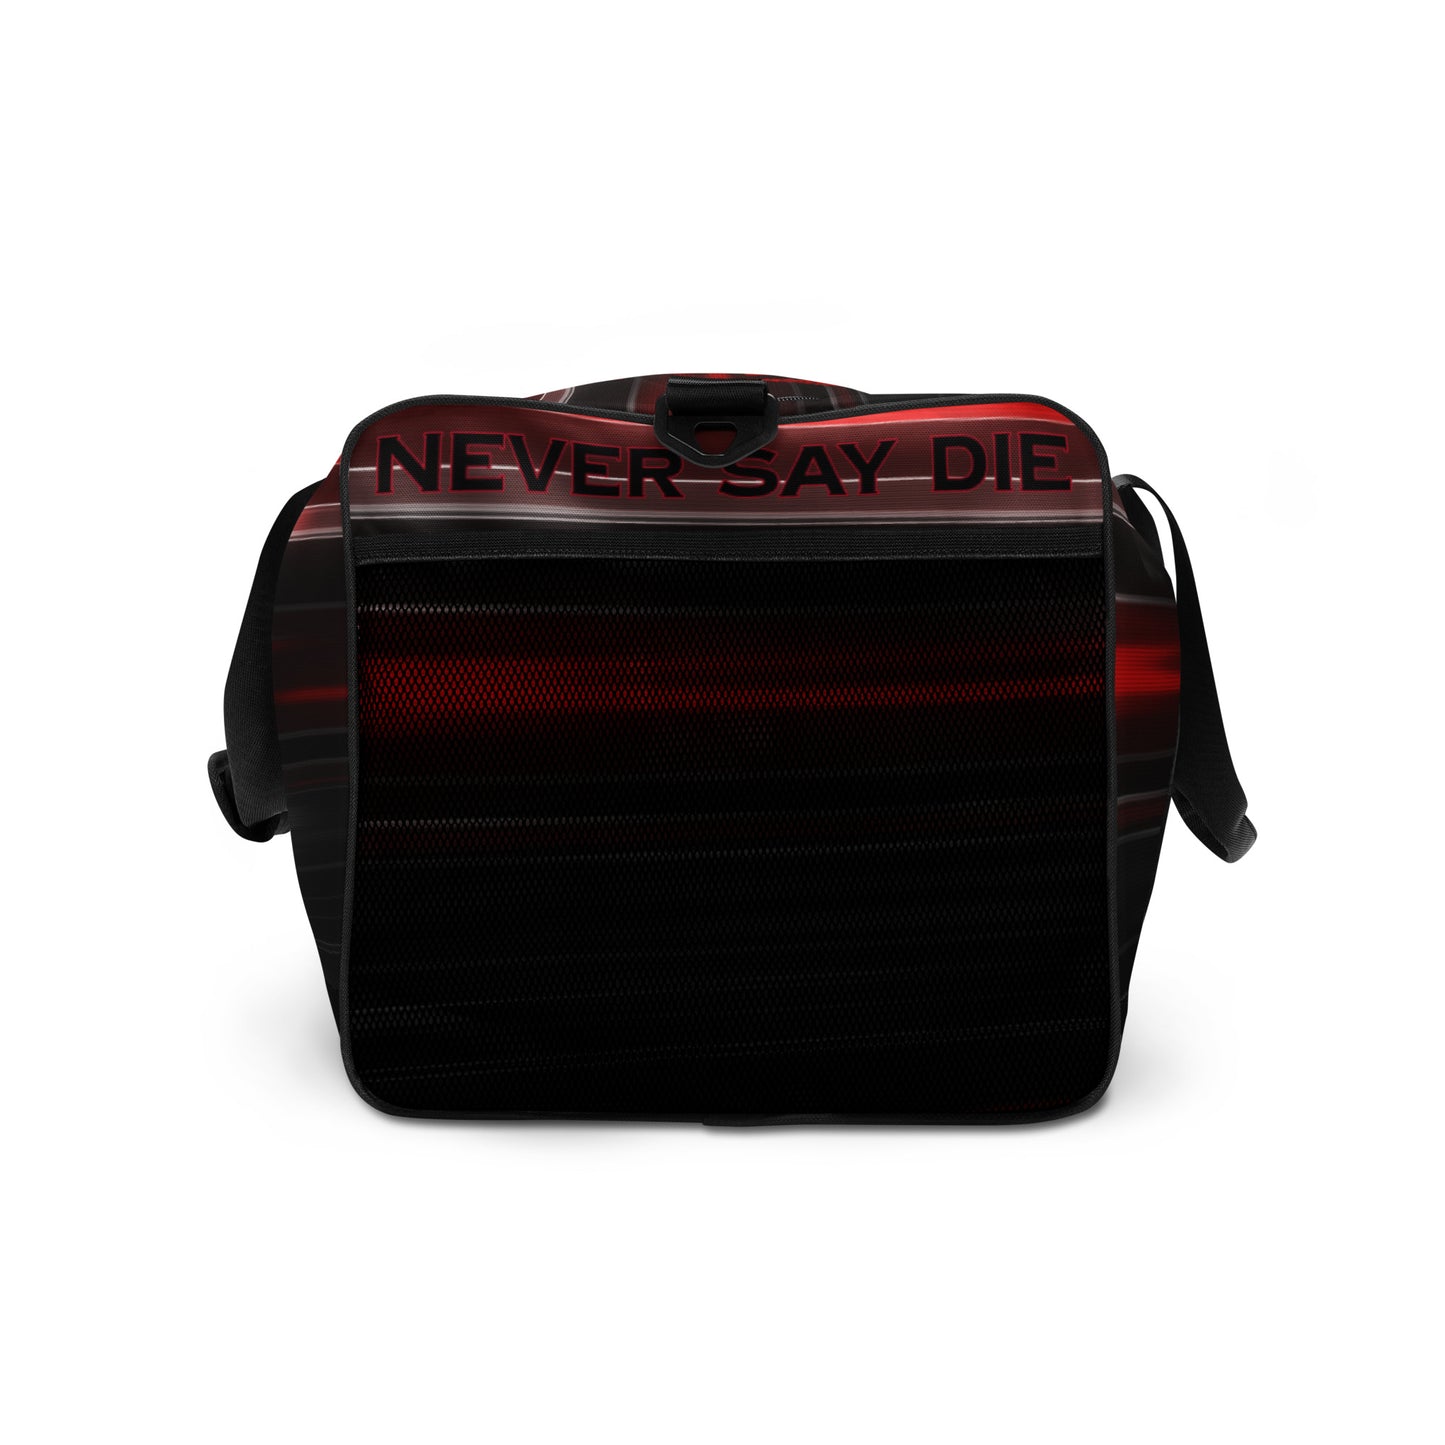 Never Say Die Gym Bag - Right Side